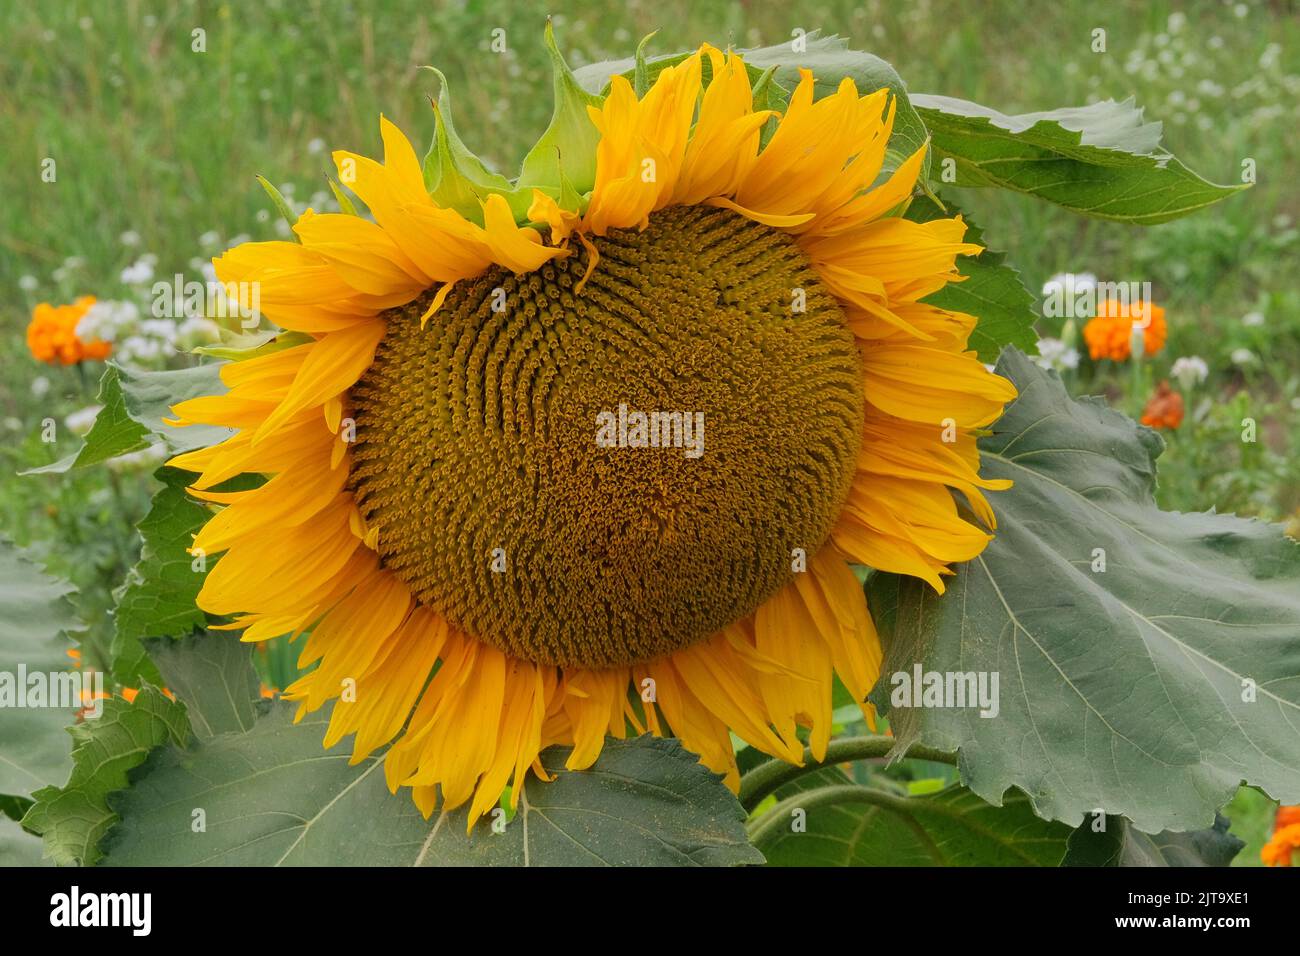 Sunflowers. Agriculture autumn background in sunny day. Yellow bright and vibrant flower. Growing vegetables. Stock Photo